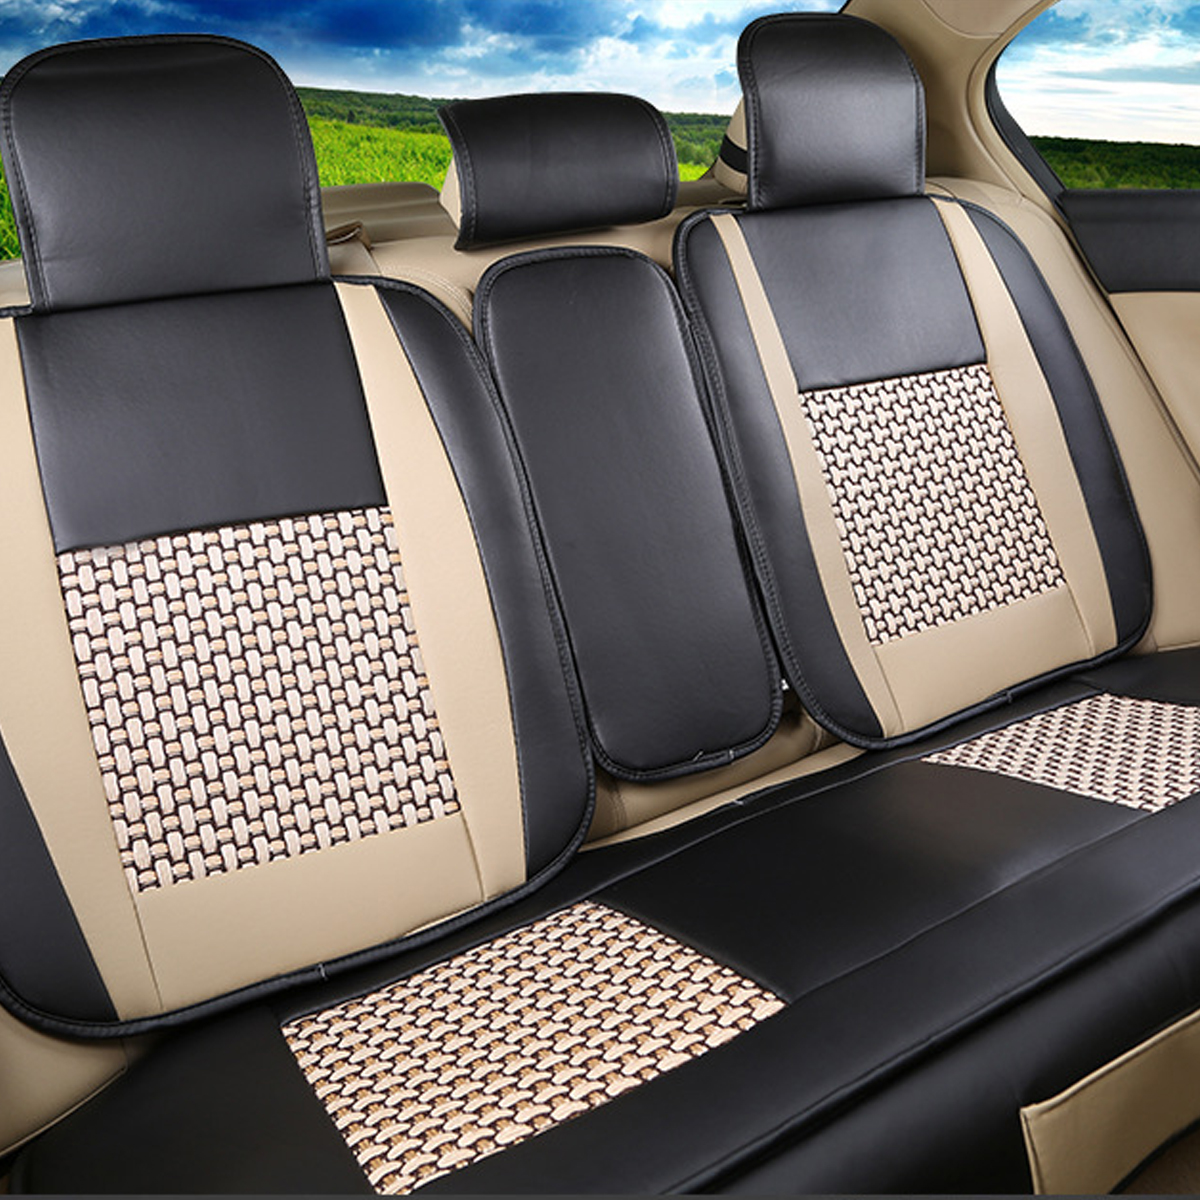 10pcs-Car-PU-Leather-Front-Rear-Car-Seat-Cushion-Covers-Universal-for-5-Seat-Car-1158669